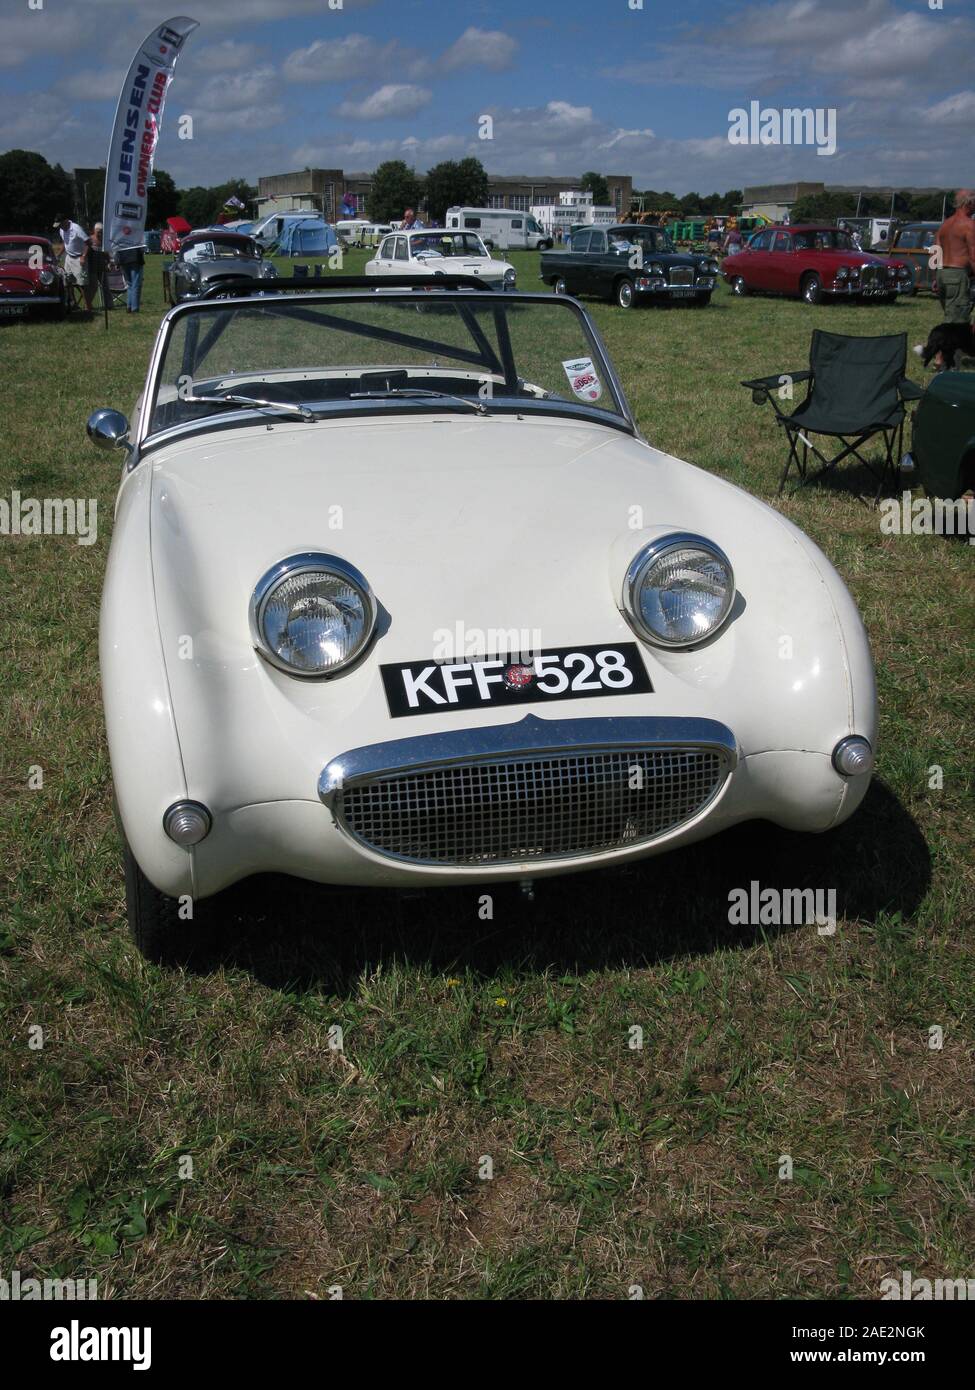 The austin healey frog eye sprite. The world's first volume-production sports car to use unitary construction. Stock Photo